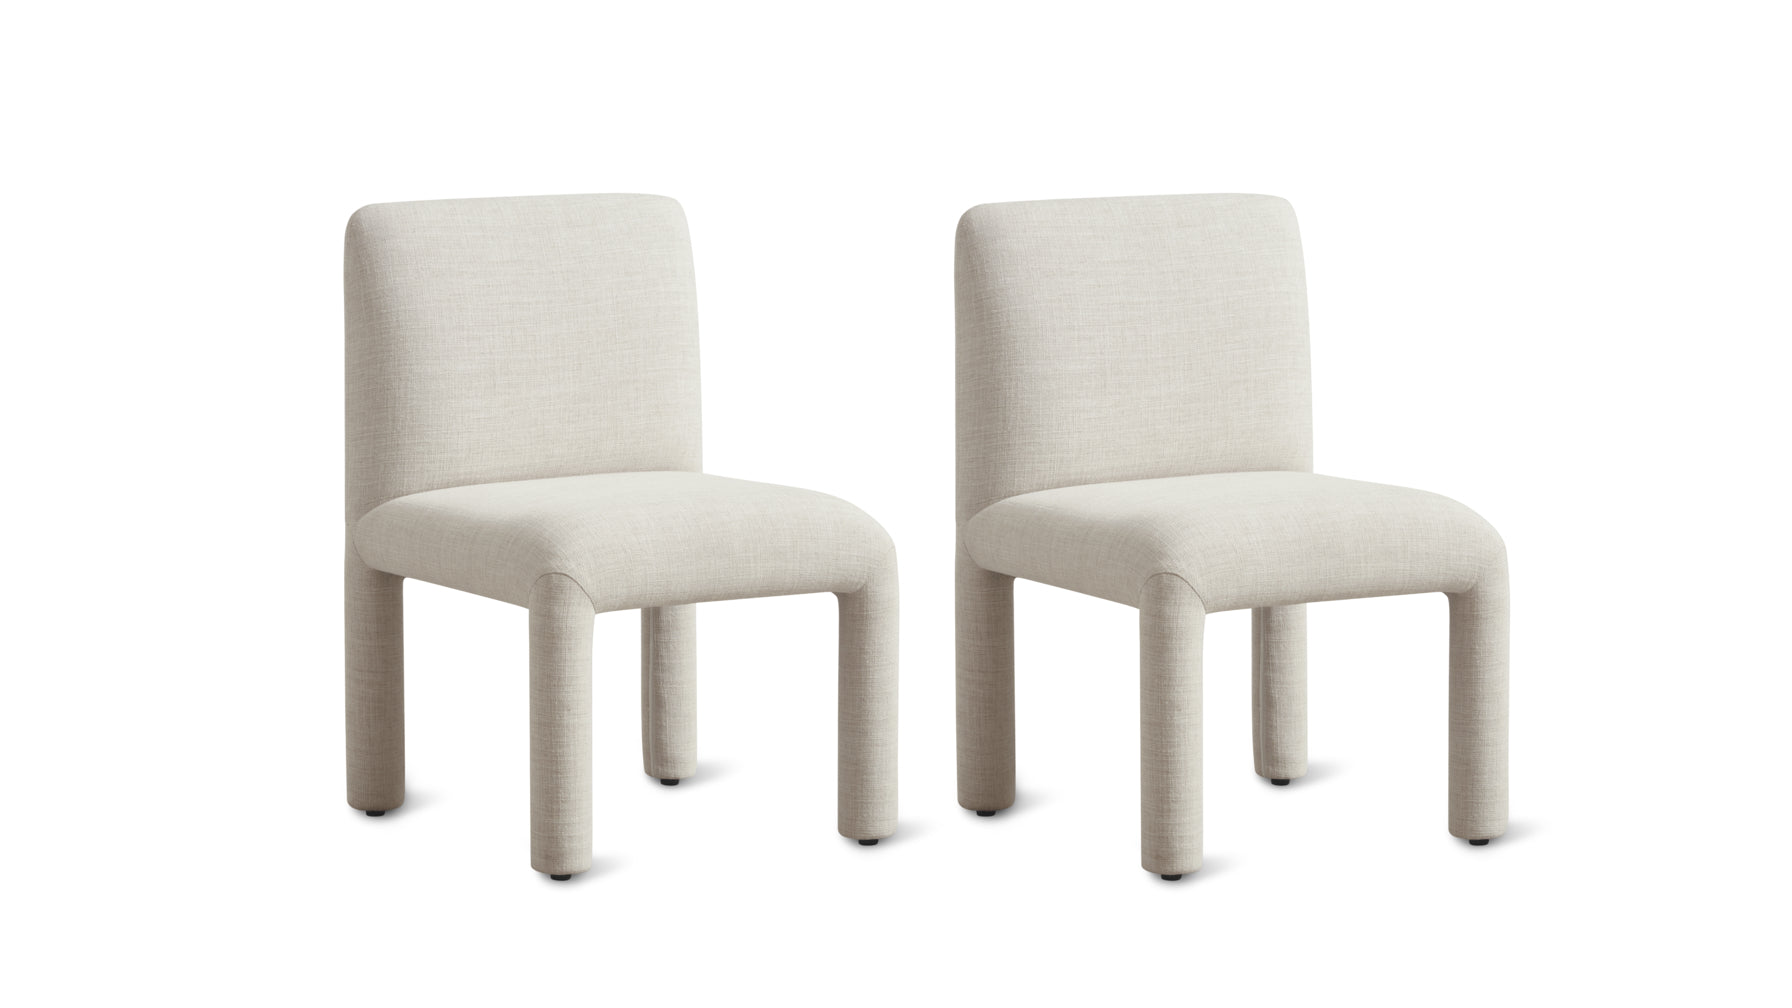 Another Round Dining Chair (Set Of Two), Parchment - Image 4